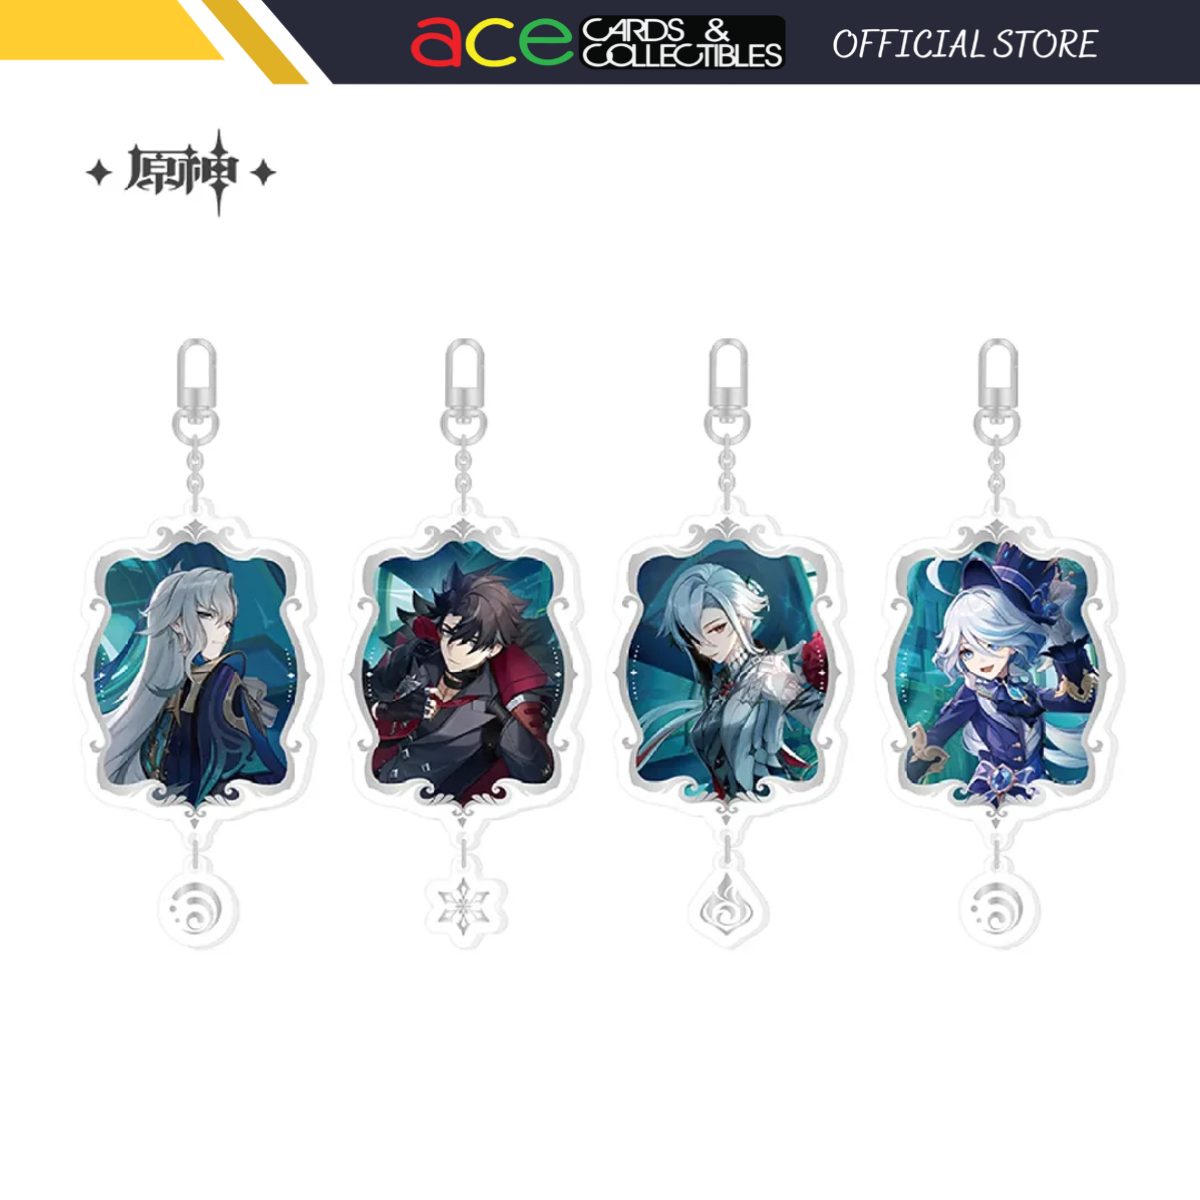 miHoYo Genshin Impact &quot;To the Stars Shining in the Depths&quot; Character Keychain-Neuvillette-miHoYo-Ace Cards &amp; Collectibles